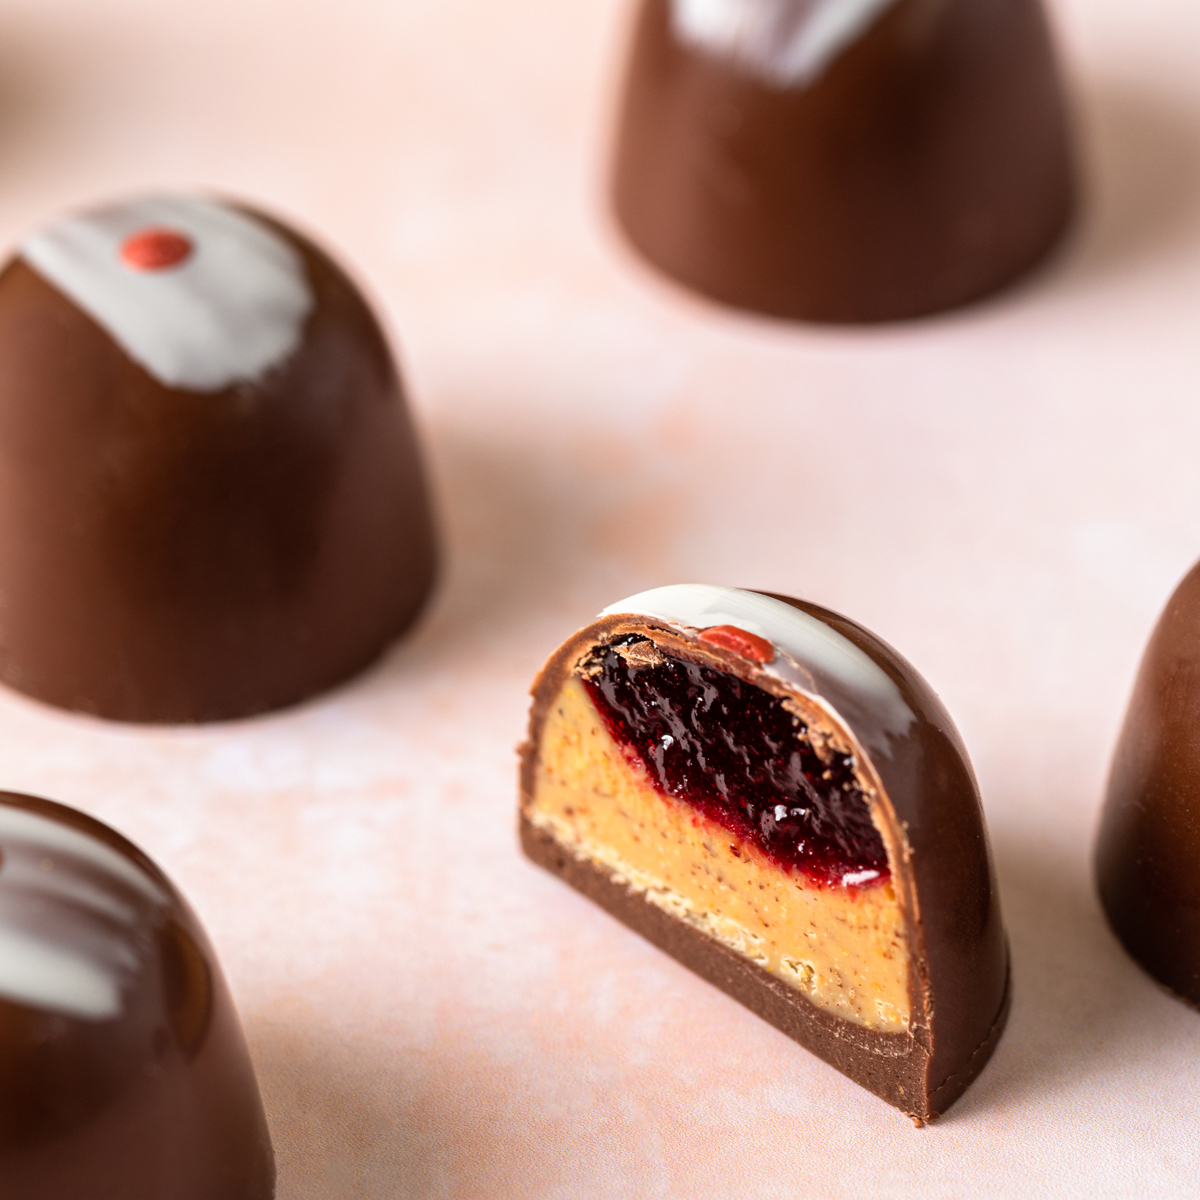 Cherry Bakewell - chocolate of the month for May